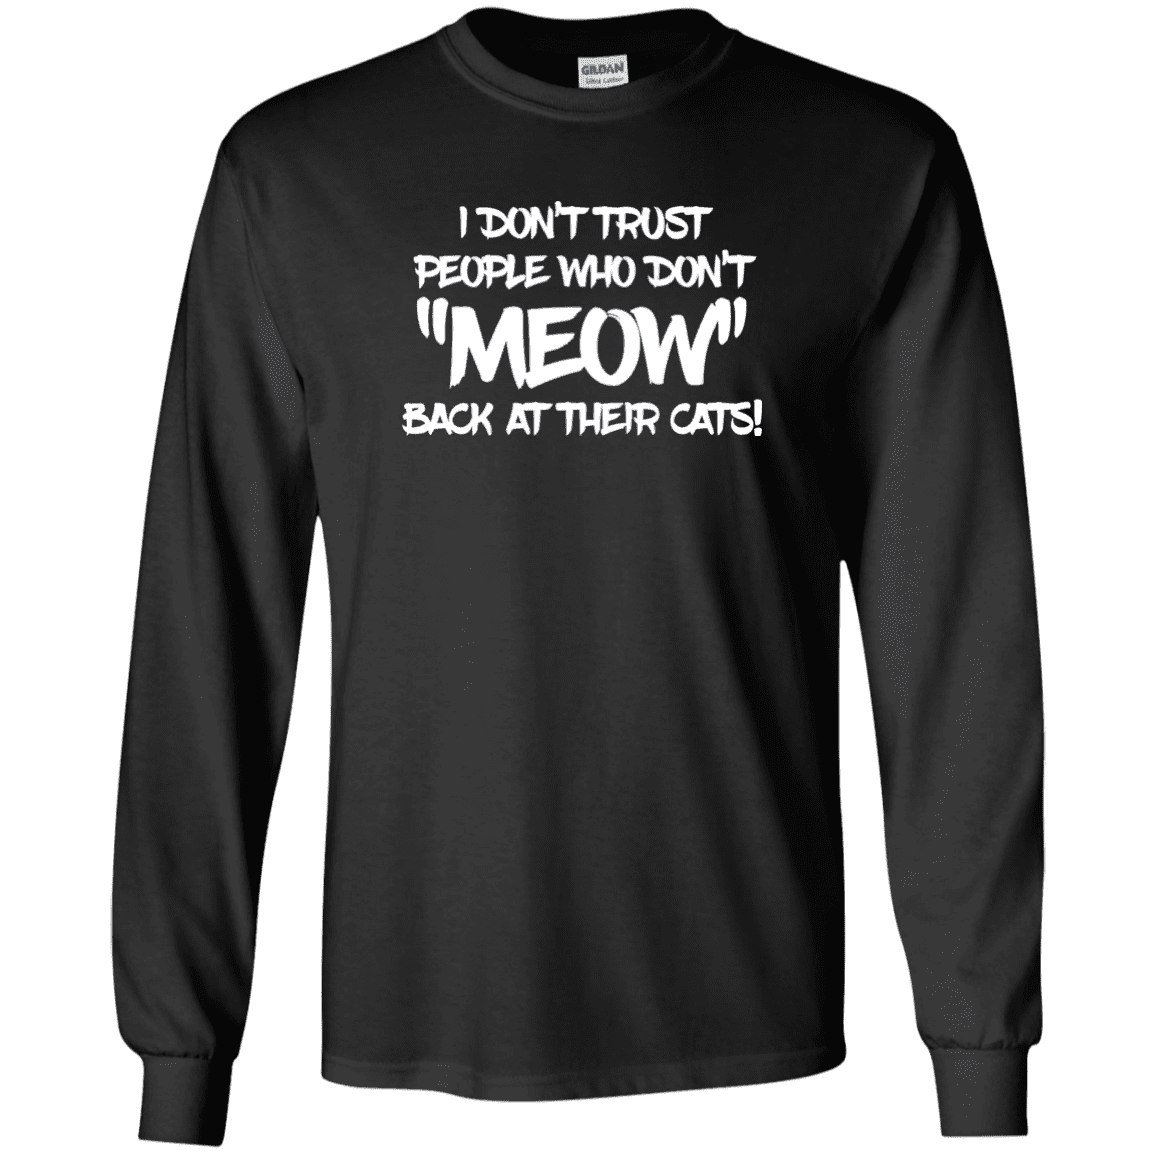 Don't Trust Don't Meow - Long Sleeve T Shirt.